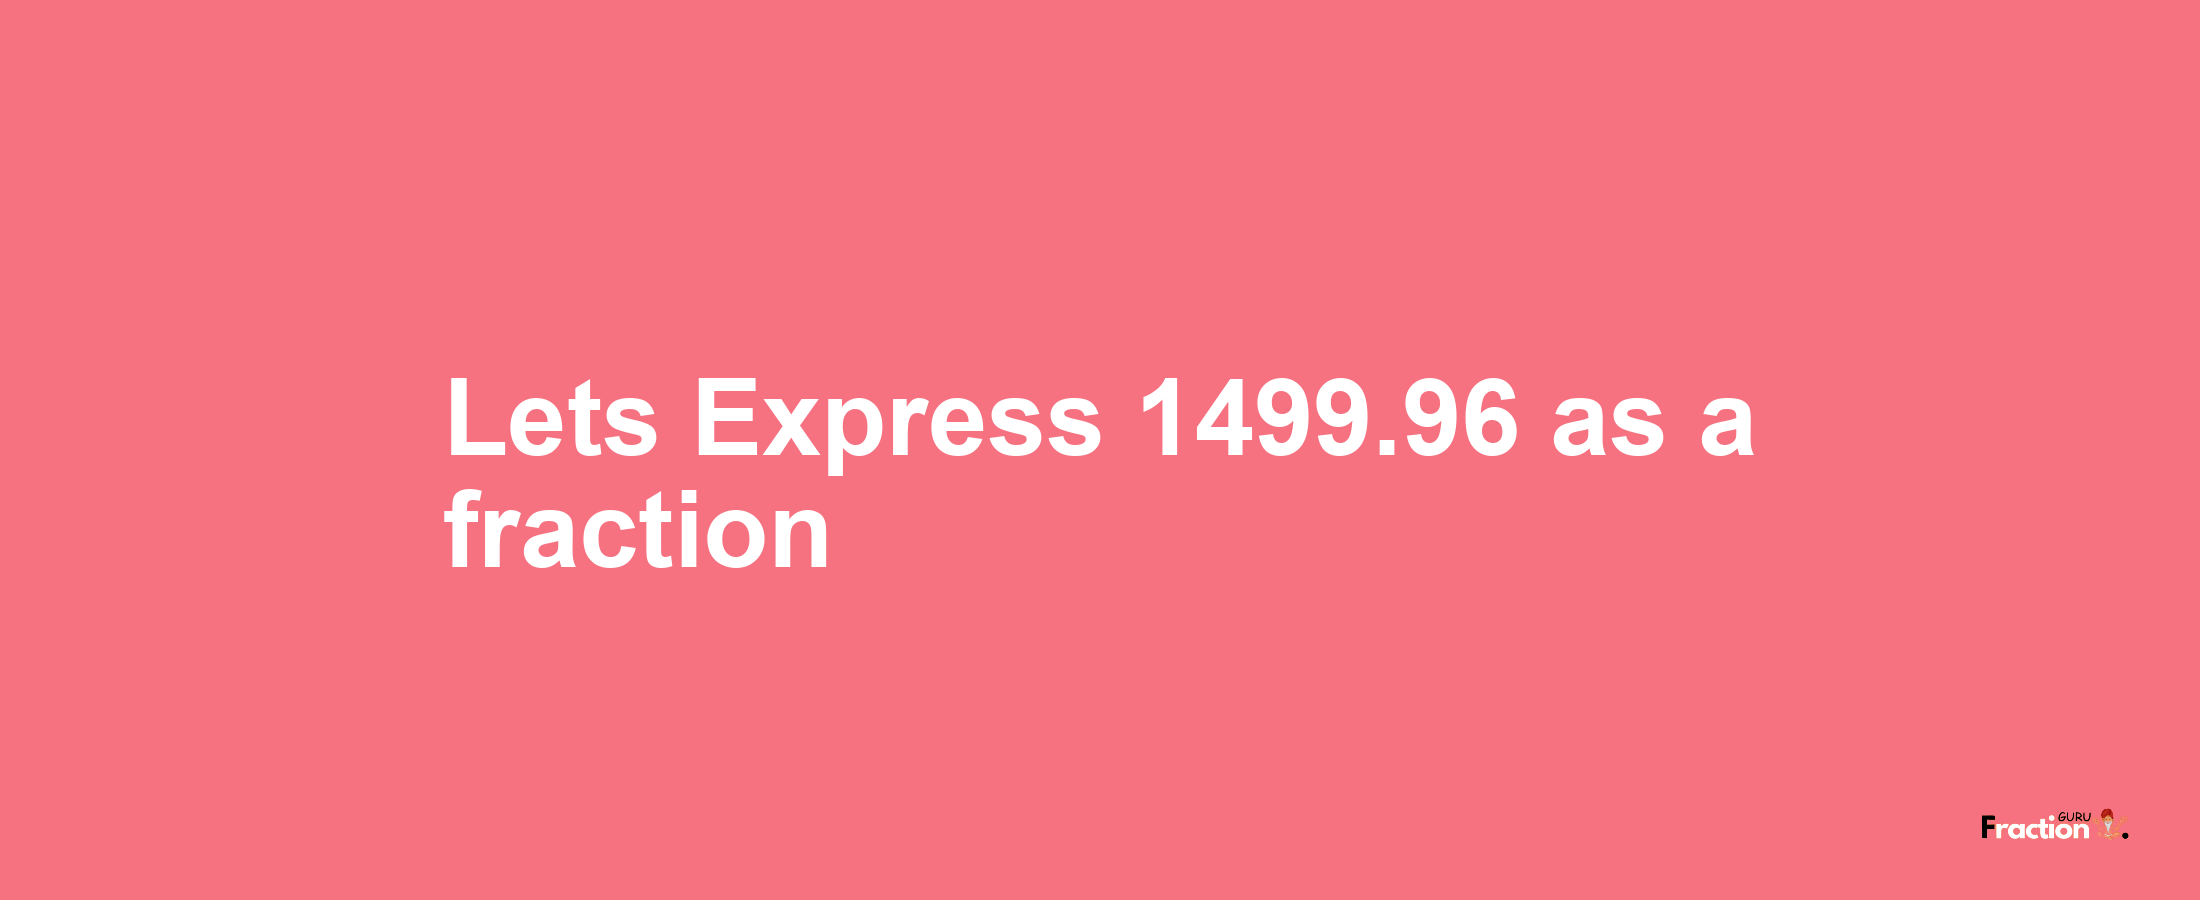 Lets Express 1499.96 as afraction